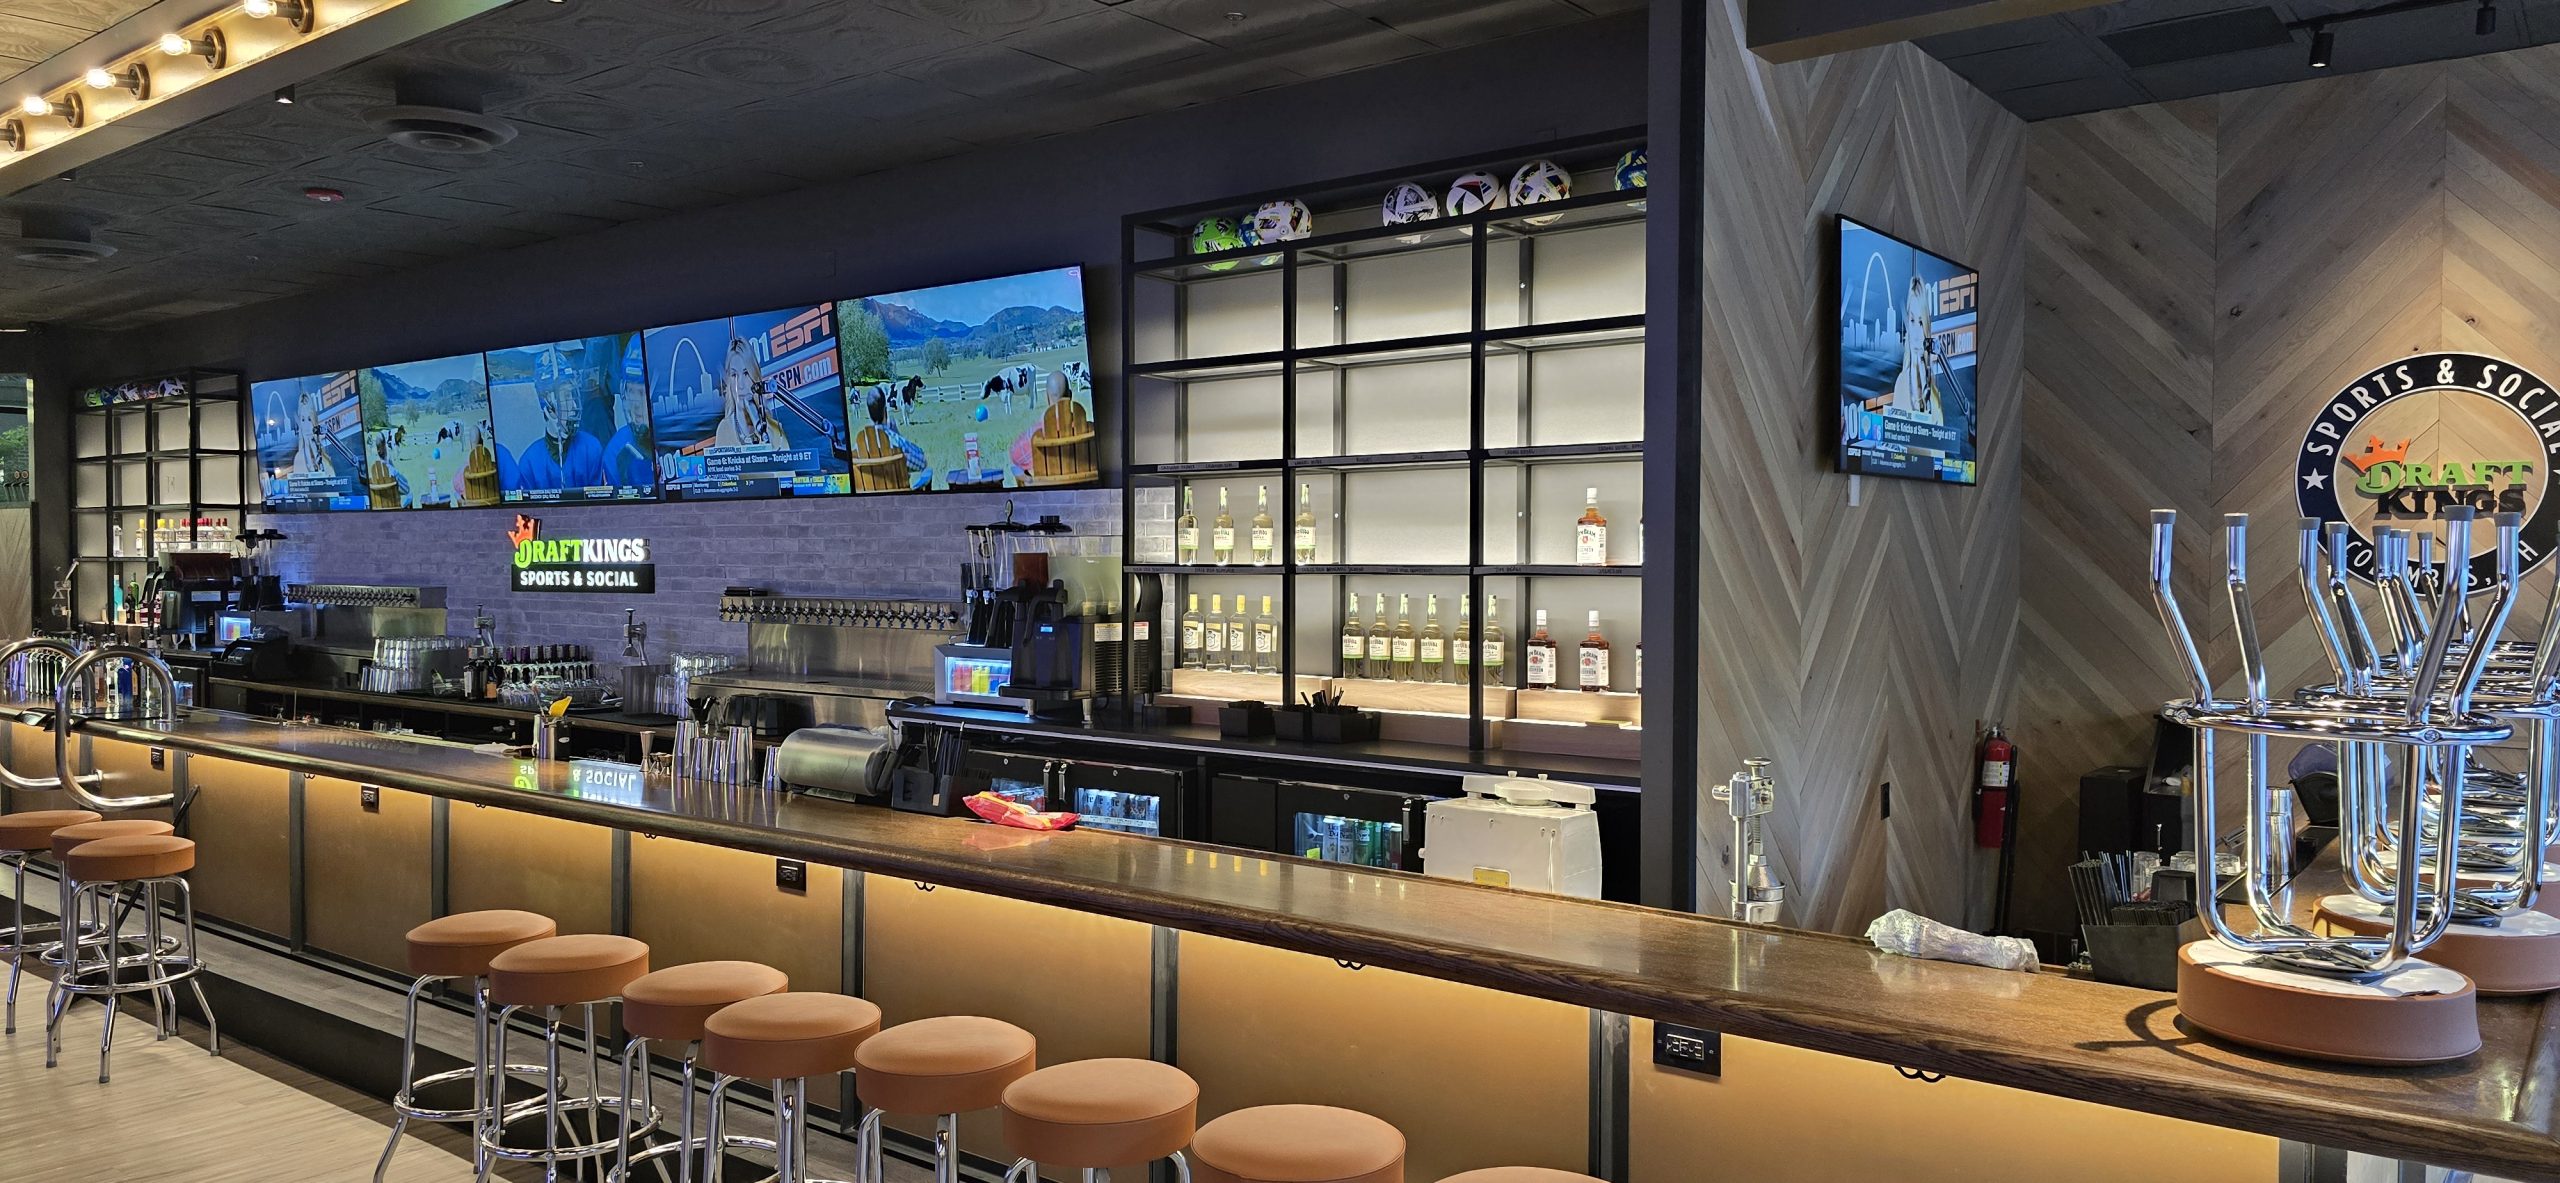 Main bar in front of dining area with TV video wall